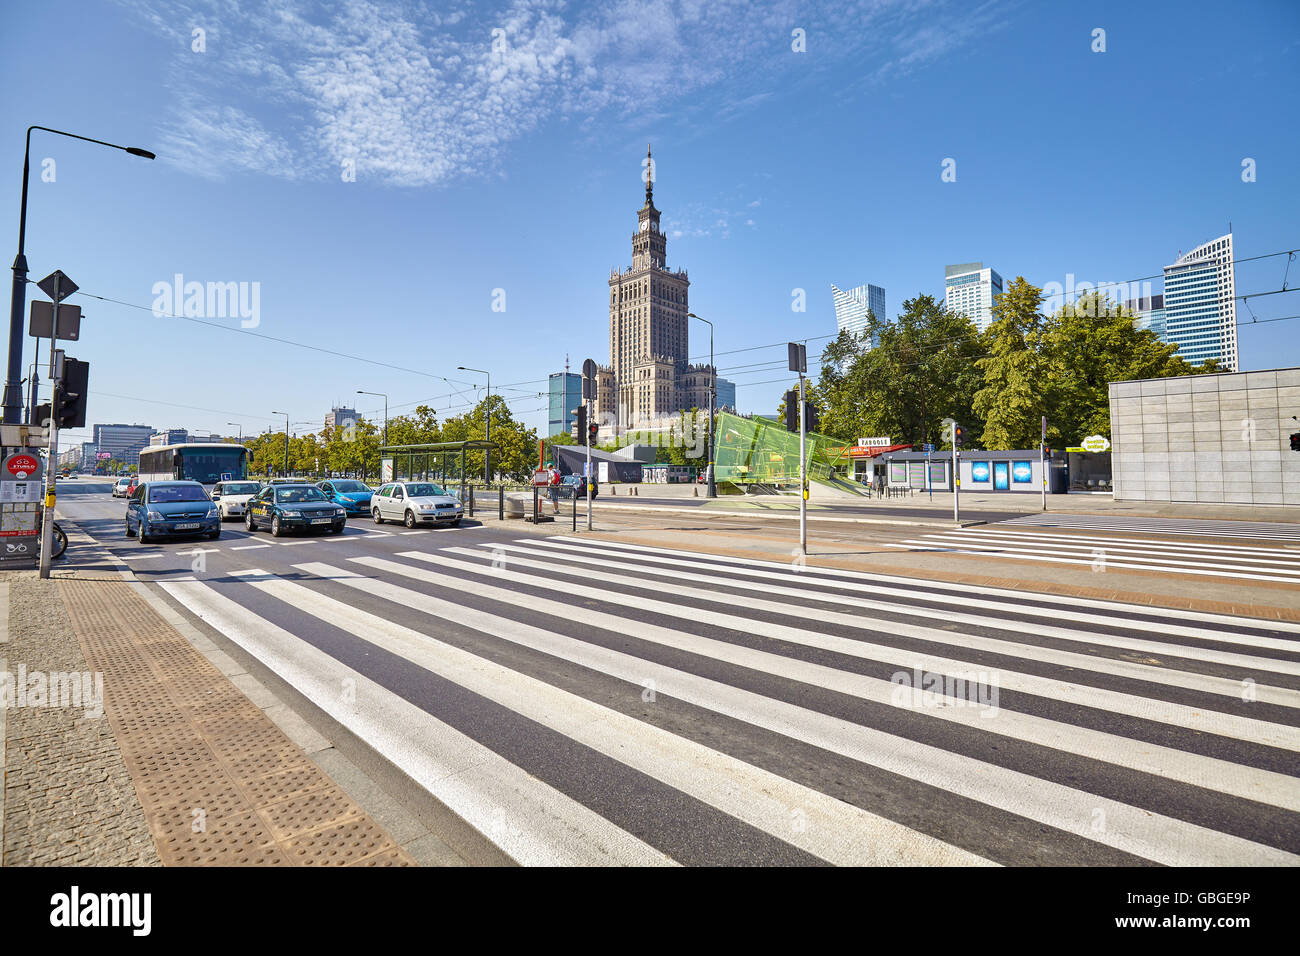 Warsaw, Poland - 26 June 2016: Pedestrian crossing in front of the Palace of Culture and Science, best known city landmark. Stock Photo